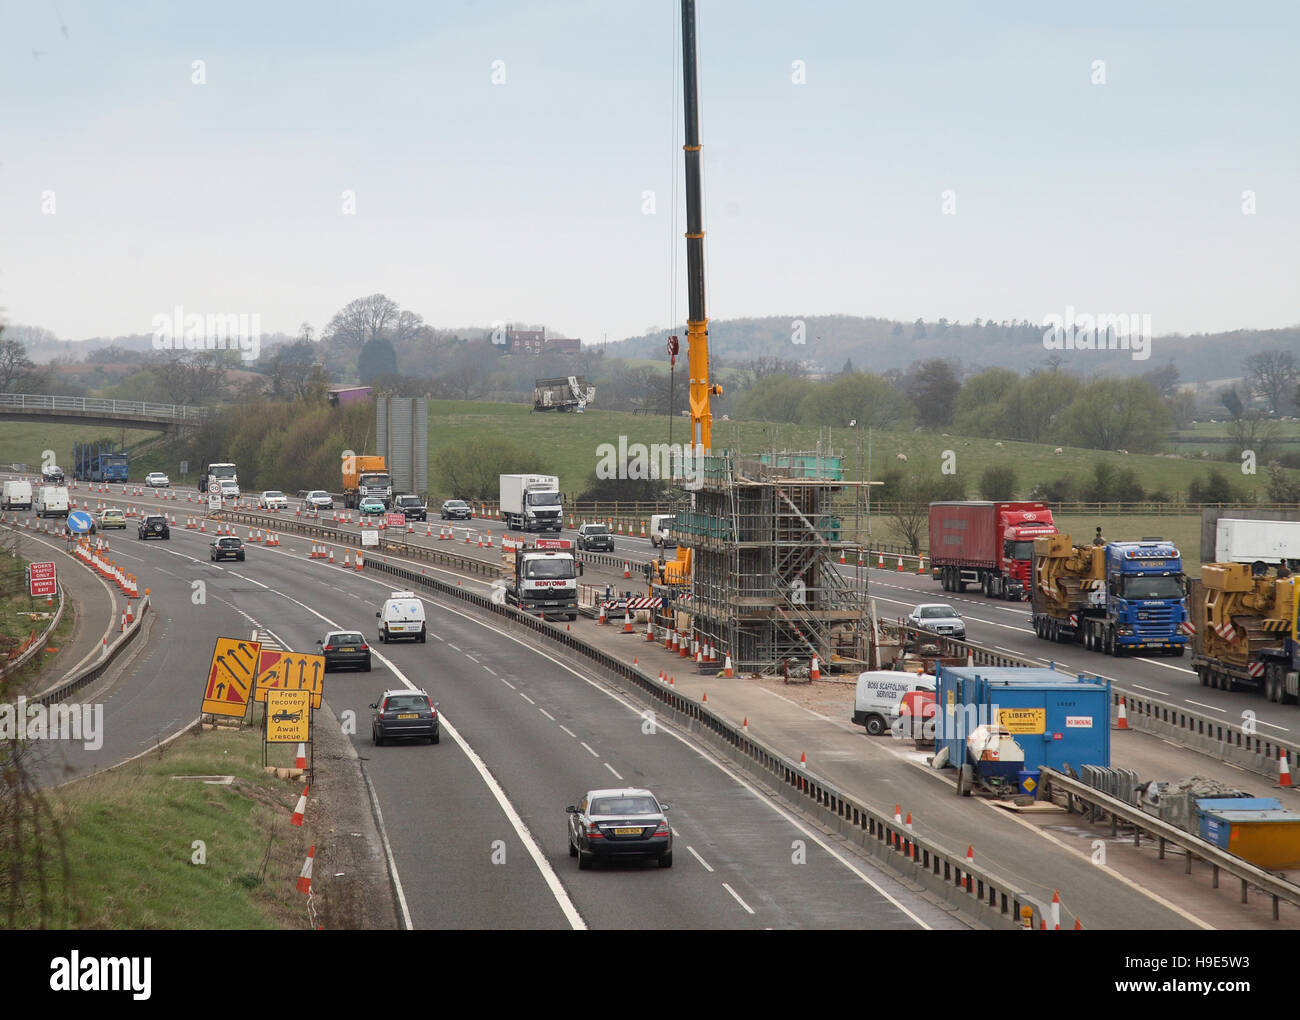 Construction of a new bridge for the A46 to span the M40 motorway, Oxfordshire, UK. Formwork for bridge piers and crane within the central reservation. Stock Photo